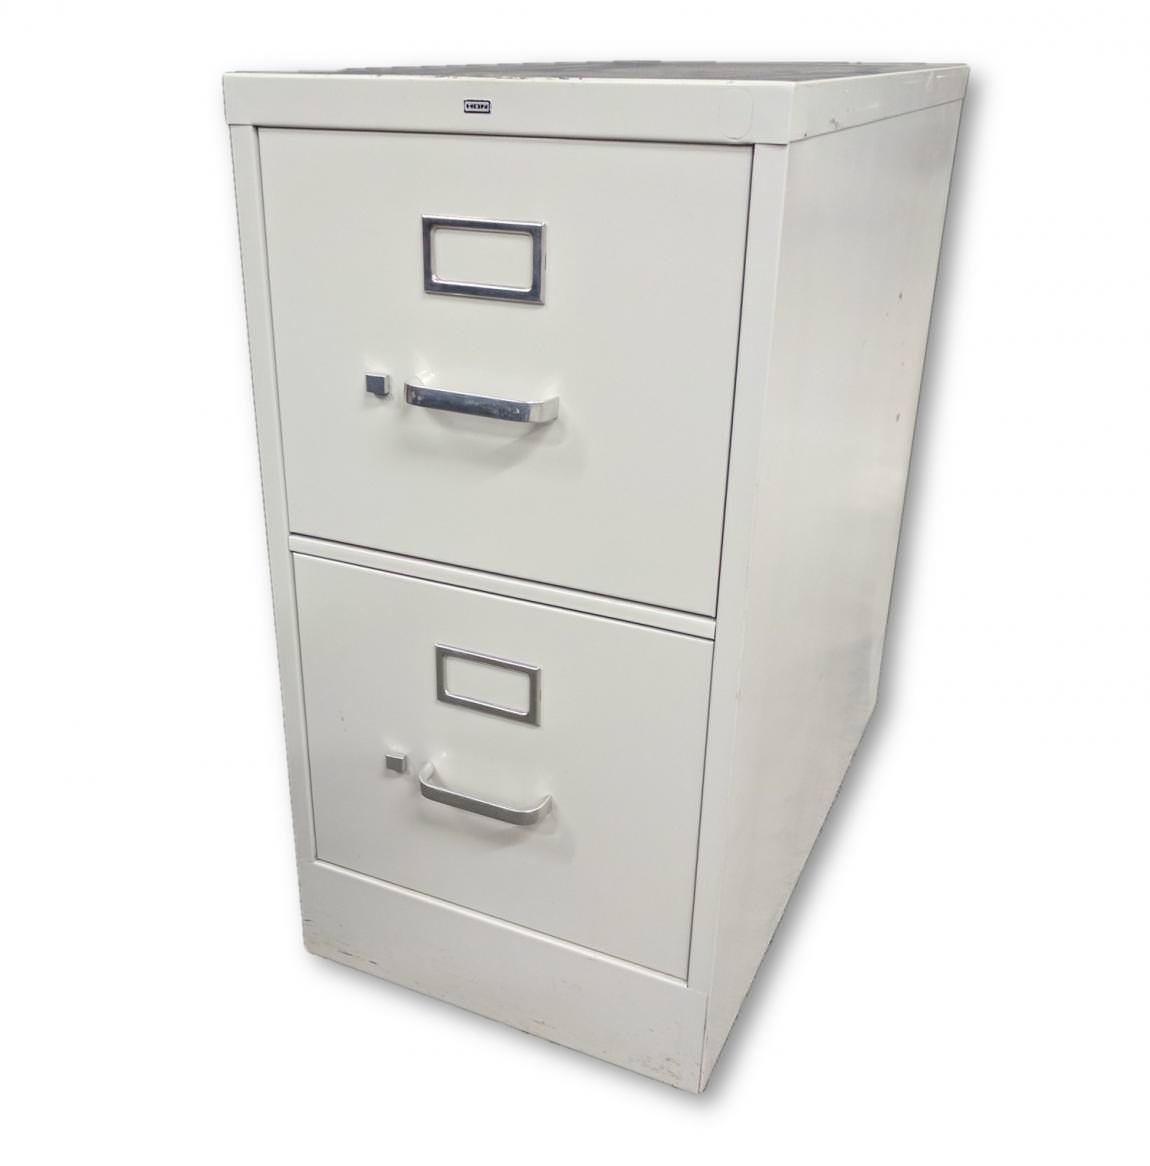 Putty Hon 2 Drawer Vertical File Cabinet By